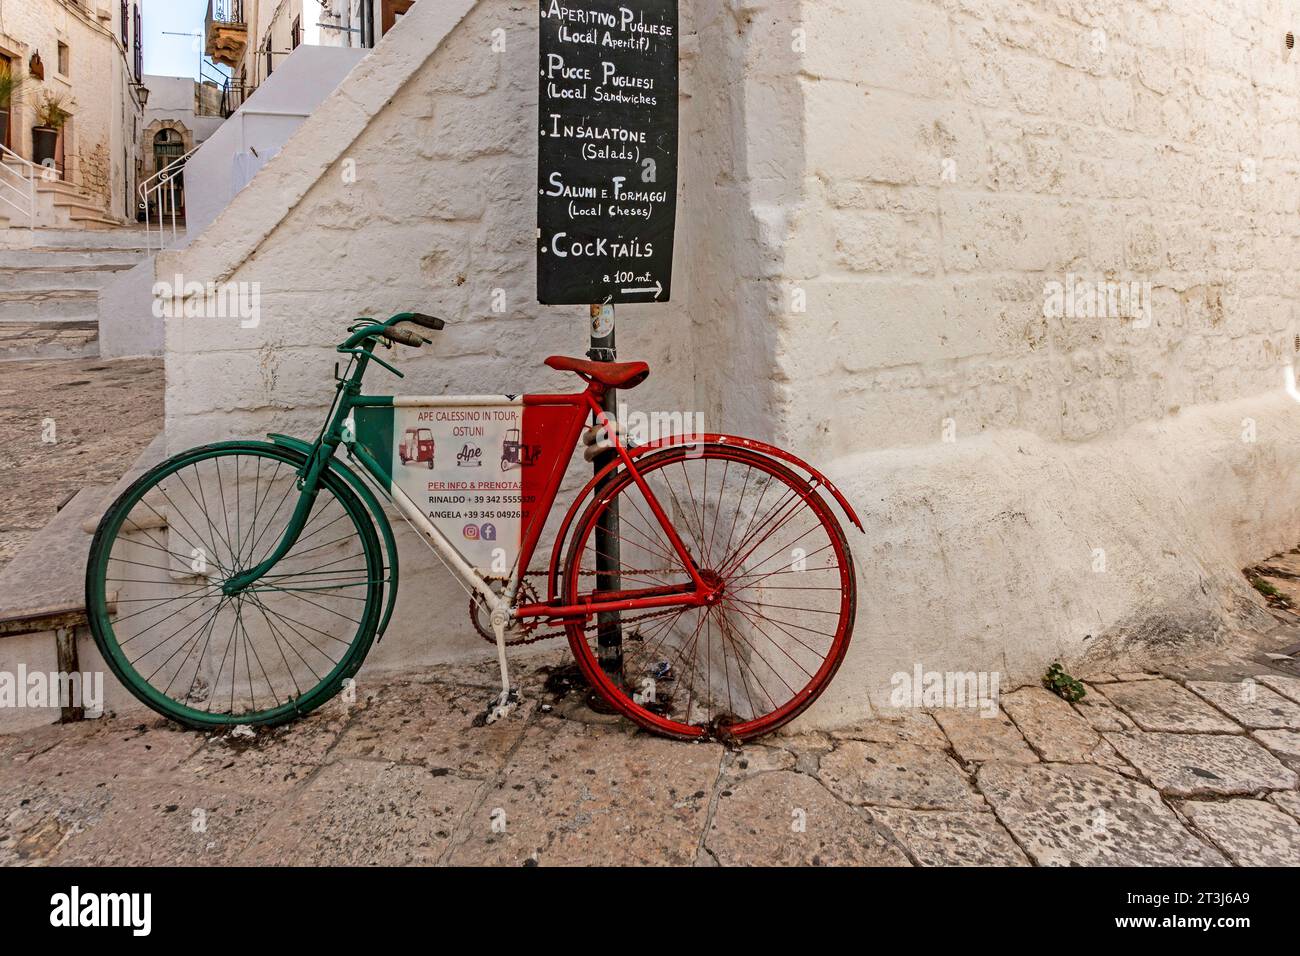 A colourful scene in Ostuni, Italy, a bicycle carrying an advertisement for TucTuc motor tours  under a sign for a local cafe. Stock Photo